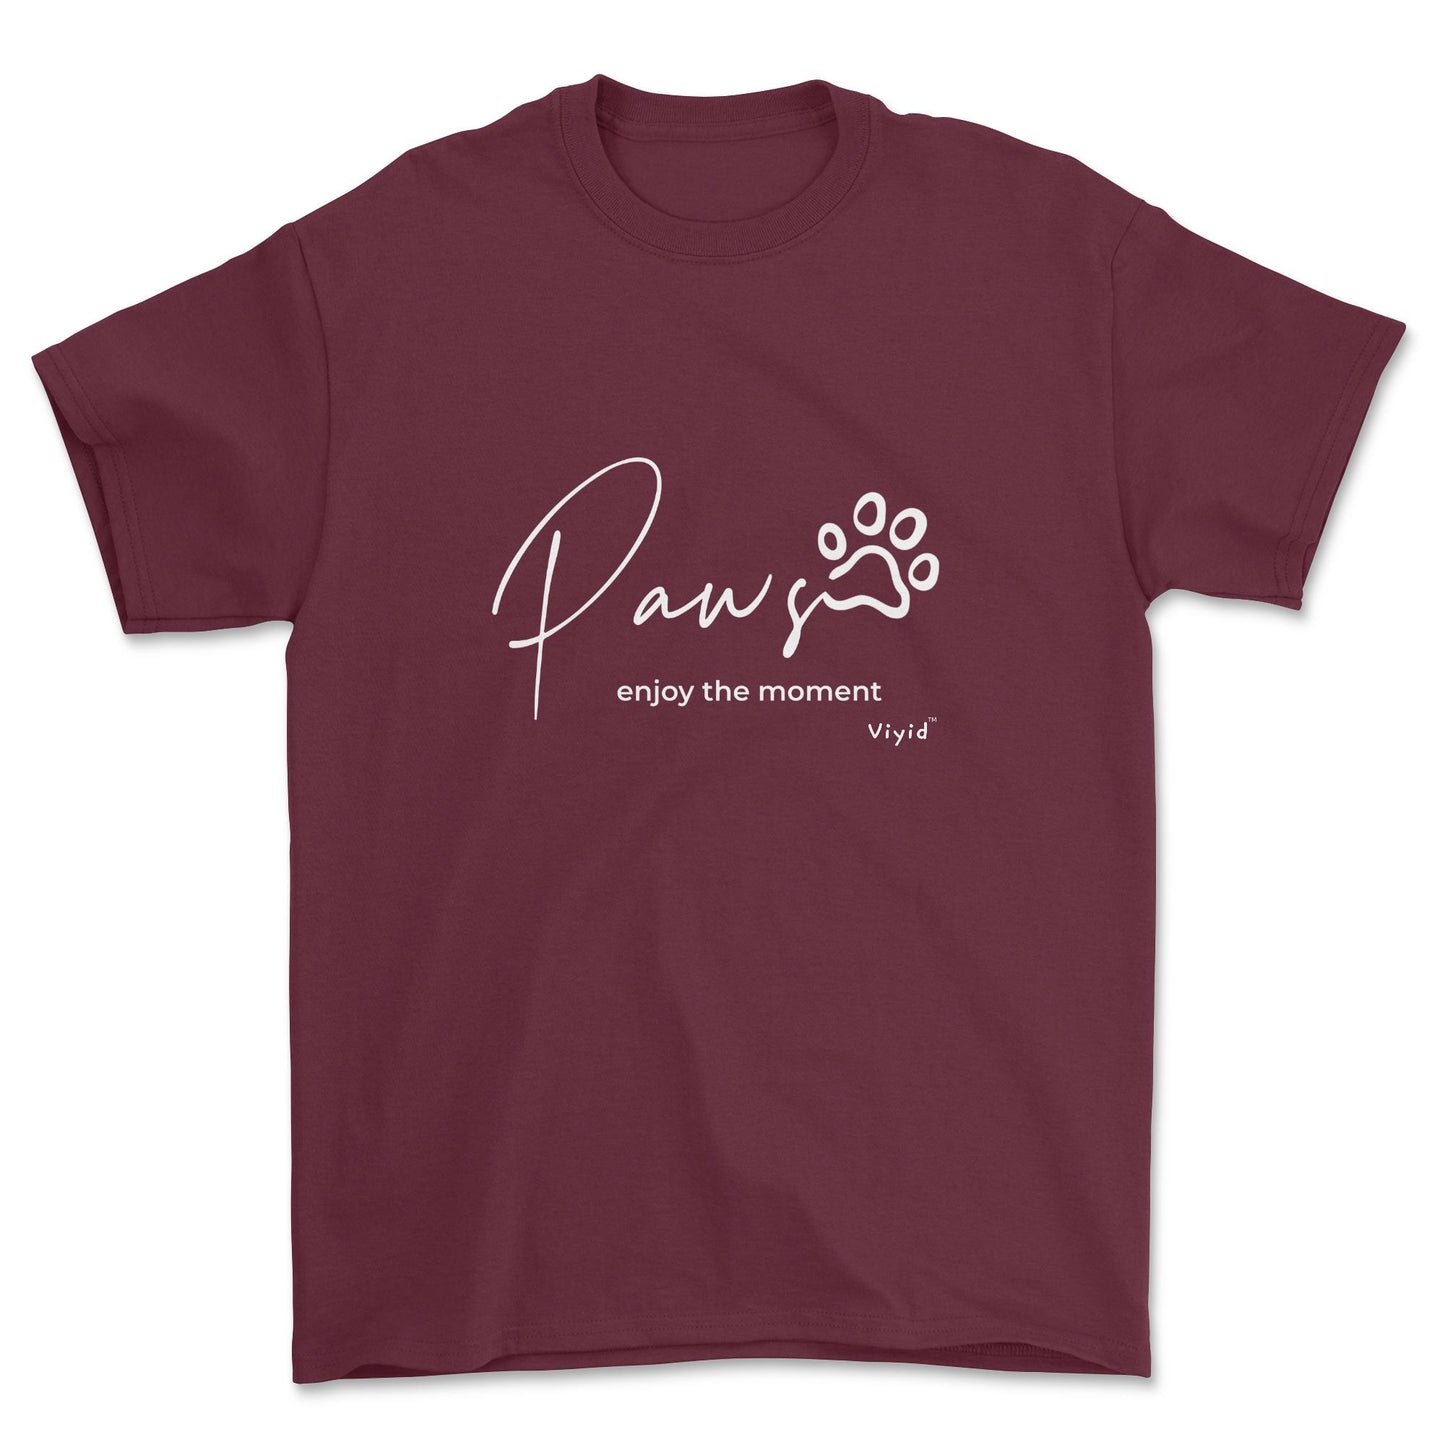 paws enjoy the moment adult t-shirt maroon